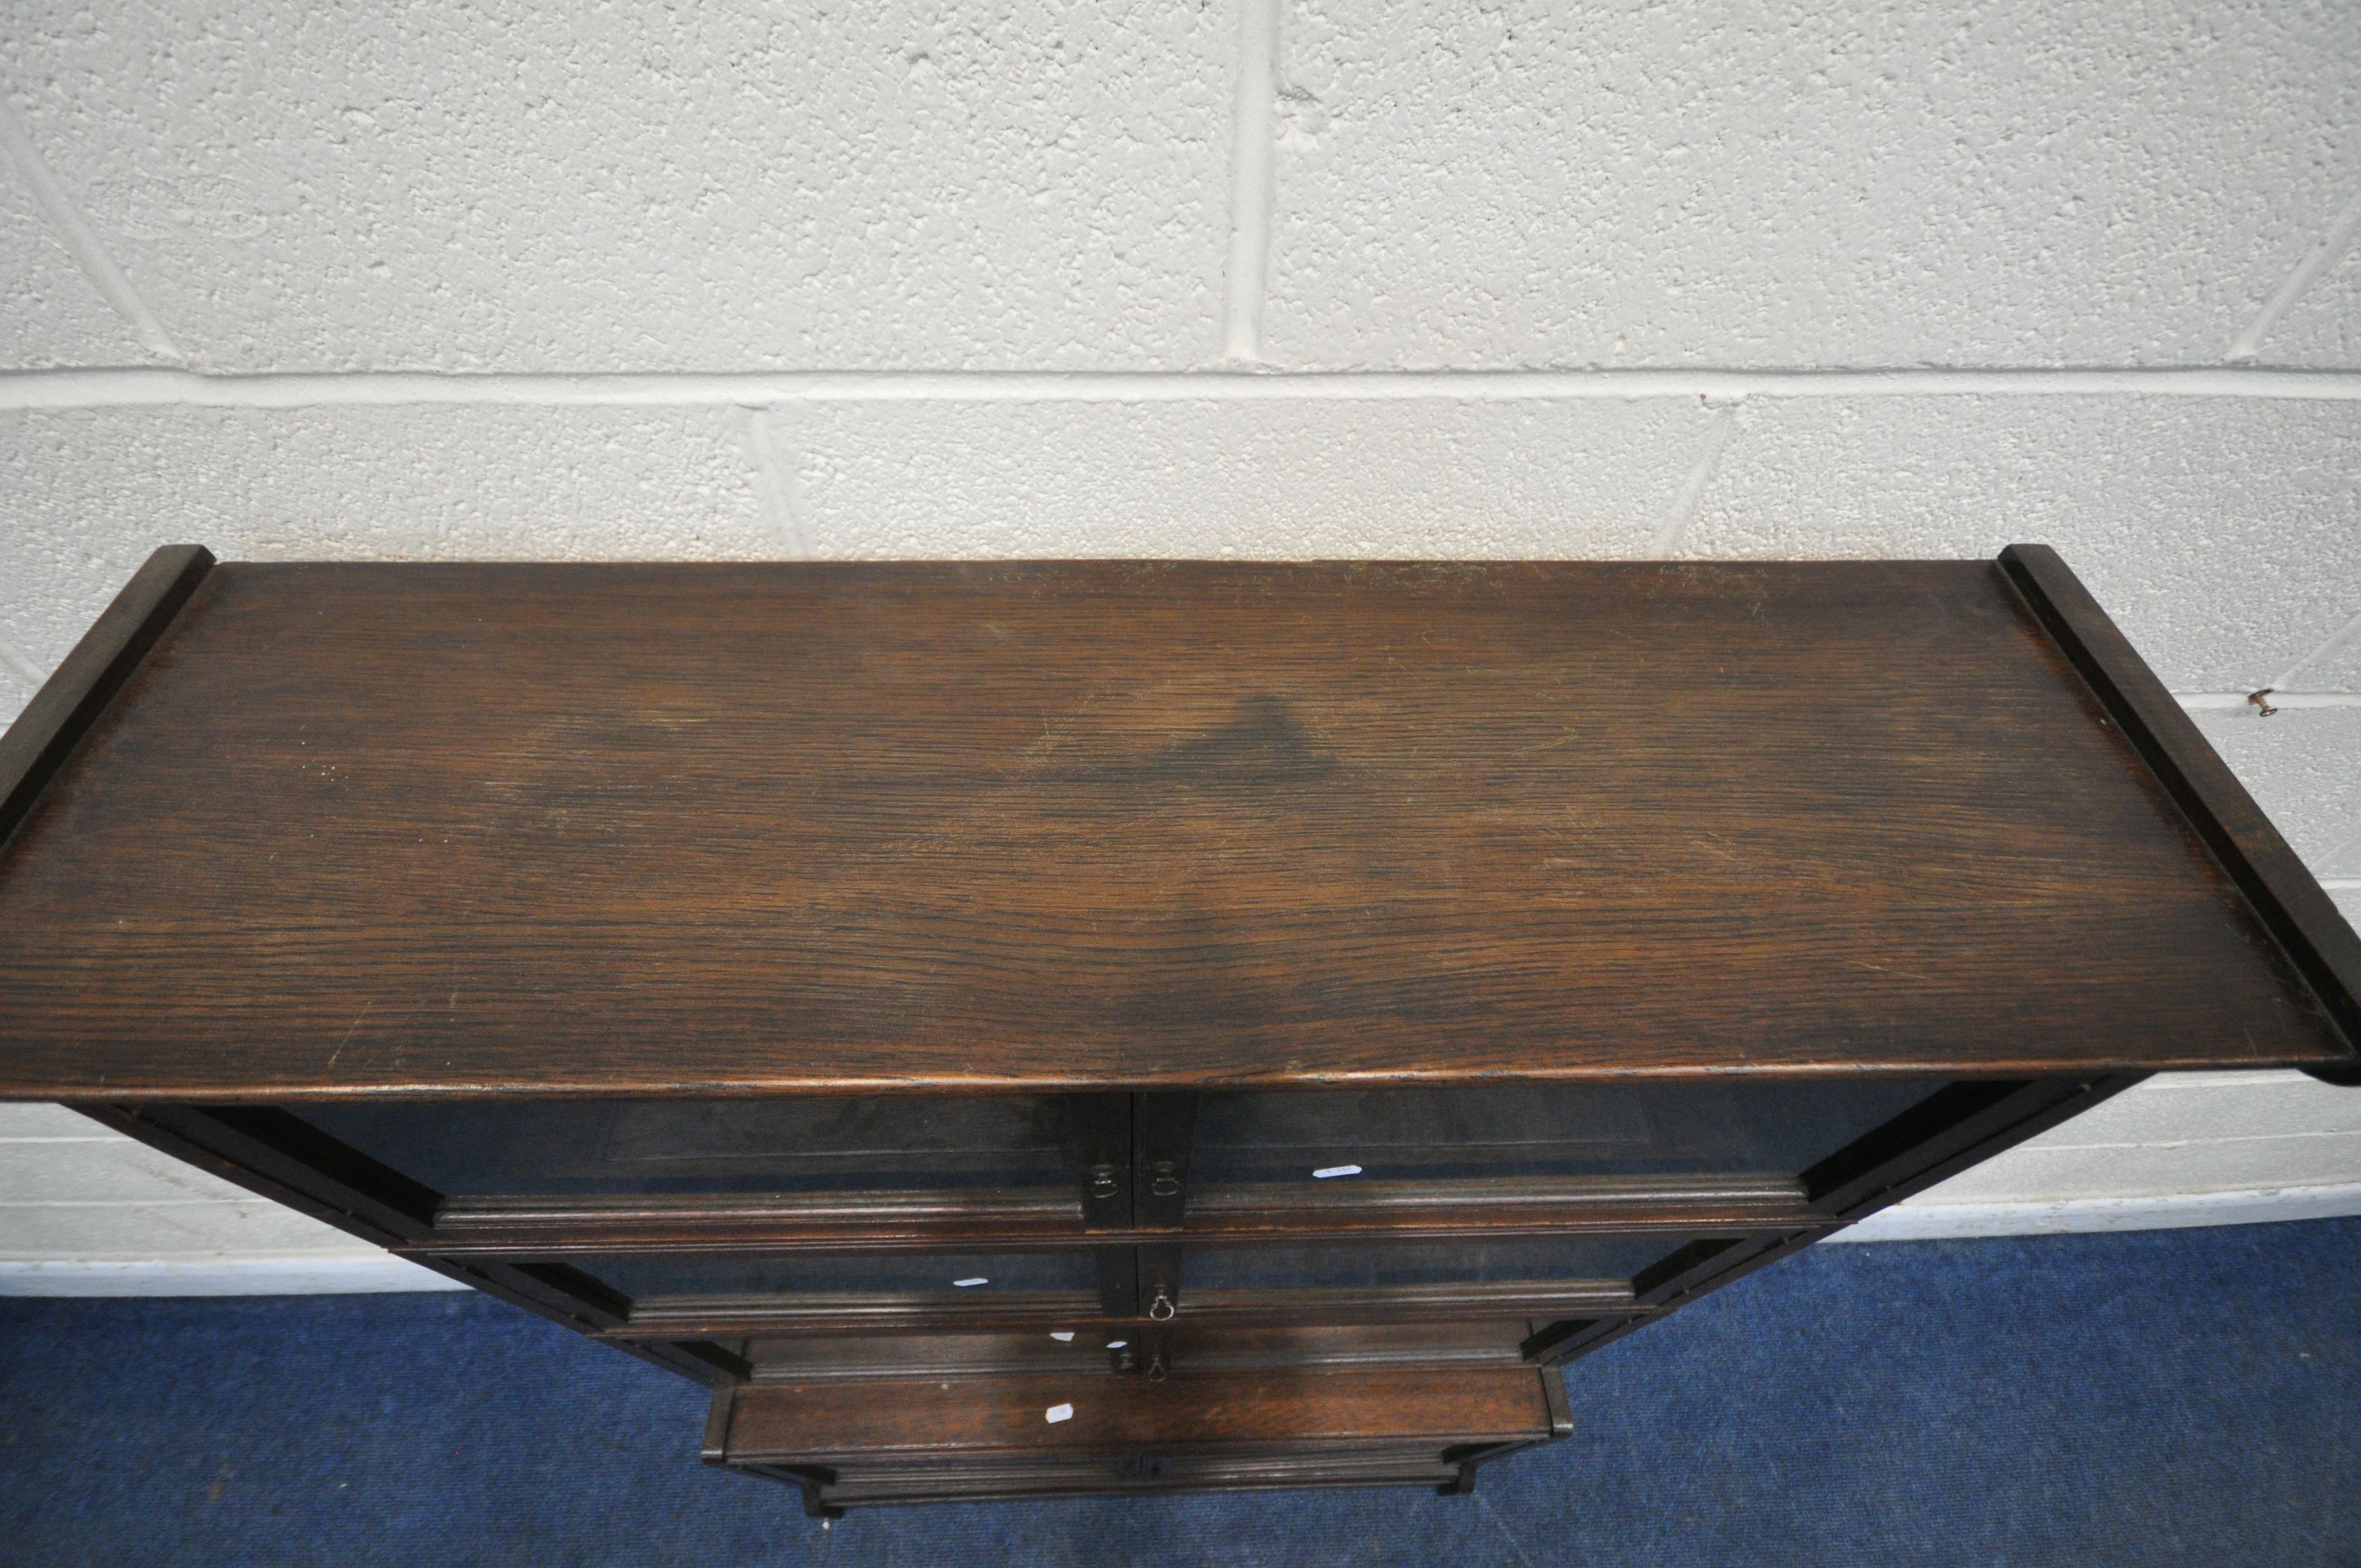 W M BAKER AND CO, OXFORD, AN EARLY 20TH CENTURY OAK SECTIONAL BOOKCASE, with one deep bottom section - Image 4 of 6